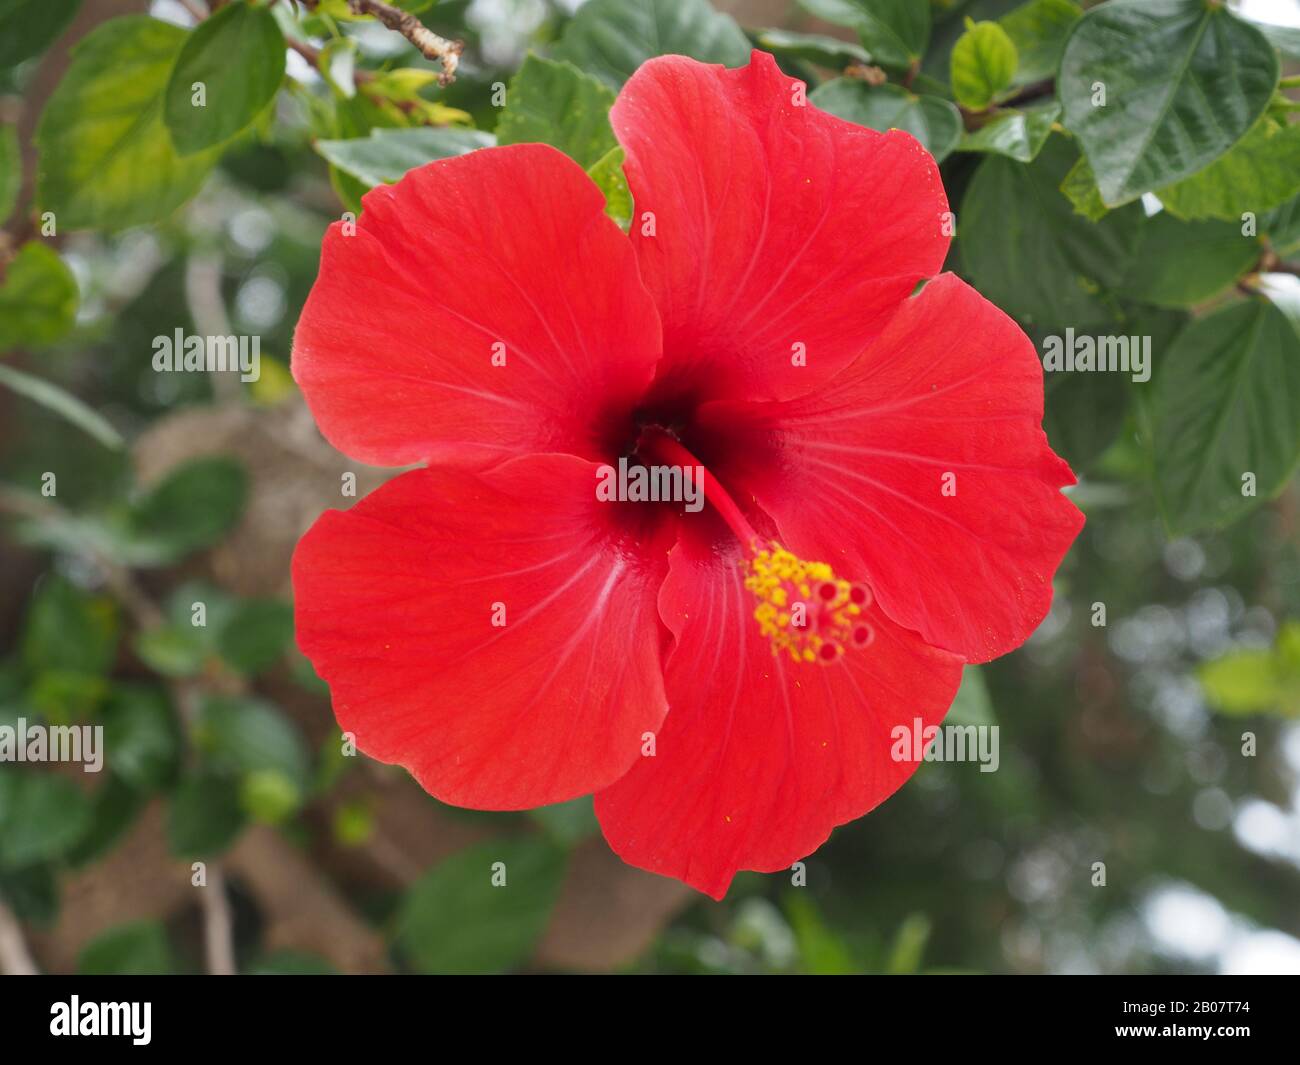 Hibiscus flower growing in Greece. Part of the mallow family, Malvaceae. Stock Photo